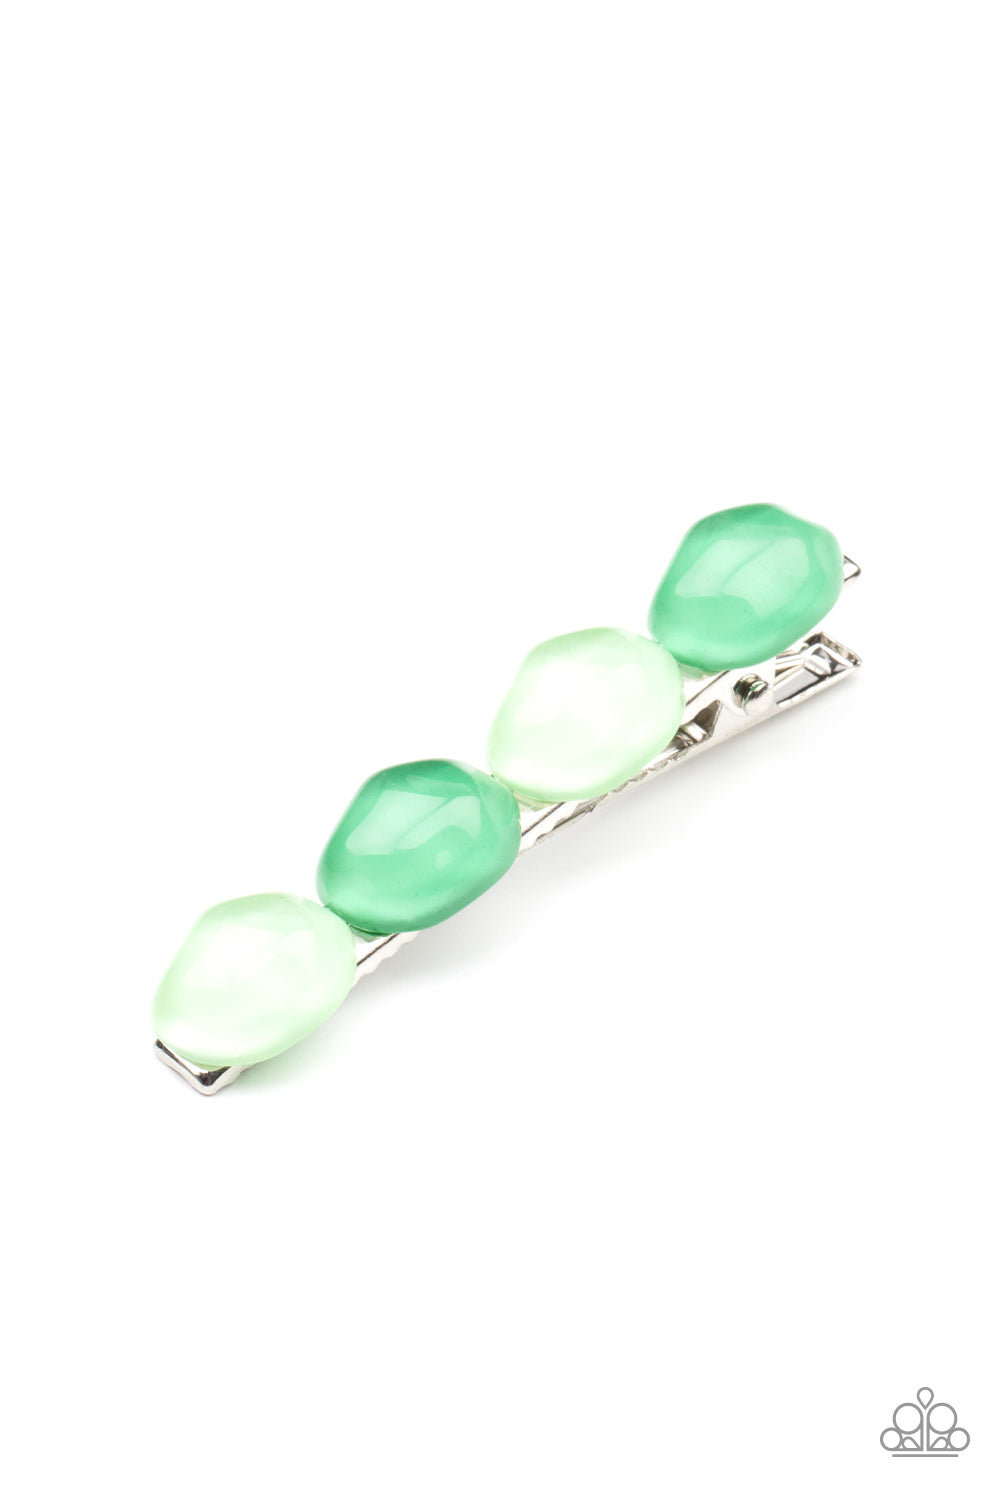 Bubbly Reflections Green Hair Clip - Paparazzi Accessories  Featuring light-scattering refractions, asymmetrical Mint and Green Ash glassy pebble-like beads adorn the front of a classic bobby pin.  All Paparazzi Accessories are lead free and nickel free!  Sold as one individual decorative bobby pin.